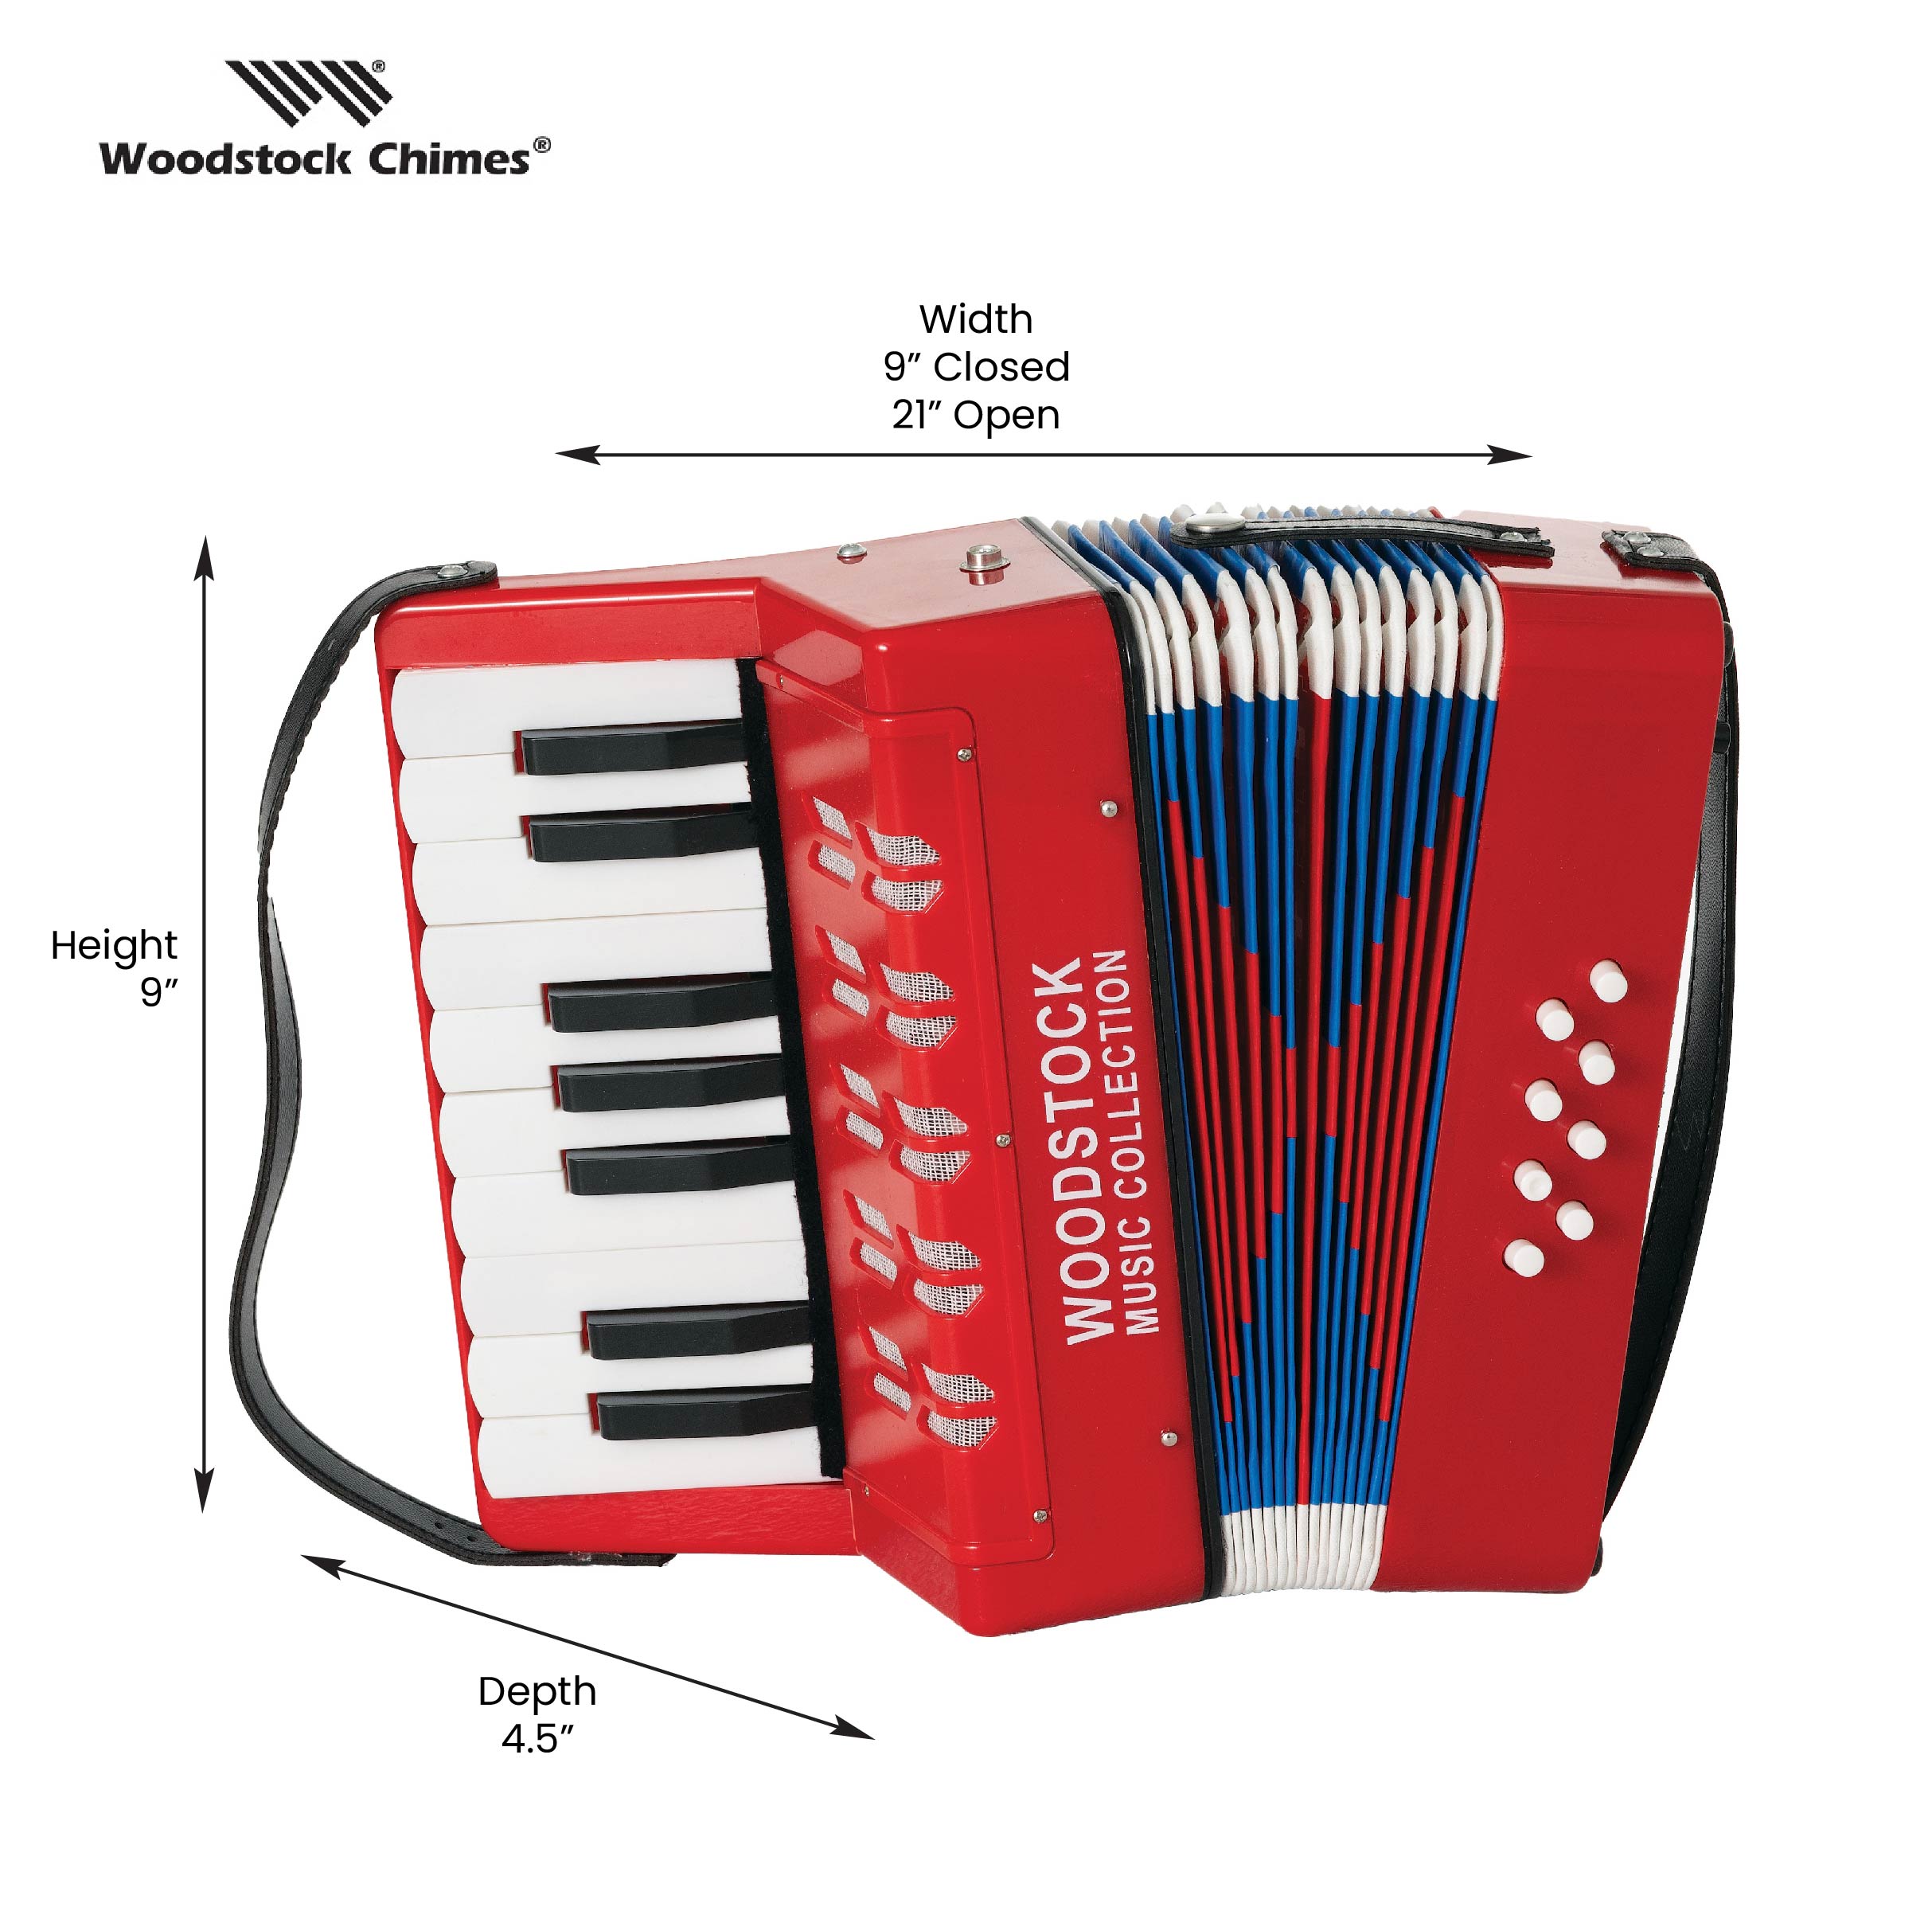 Eastar Kids Accordion, 10 Keys Toy Musical Instruments for